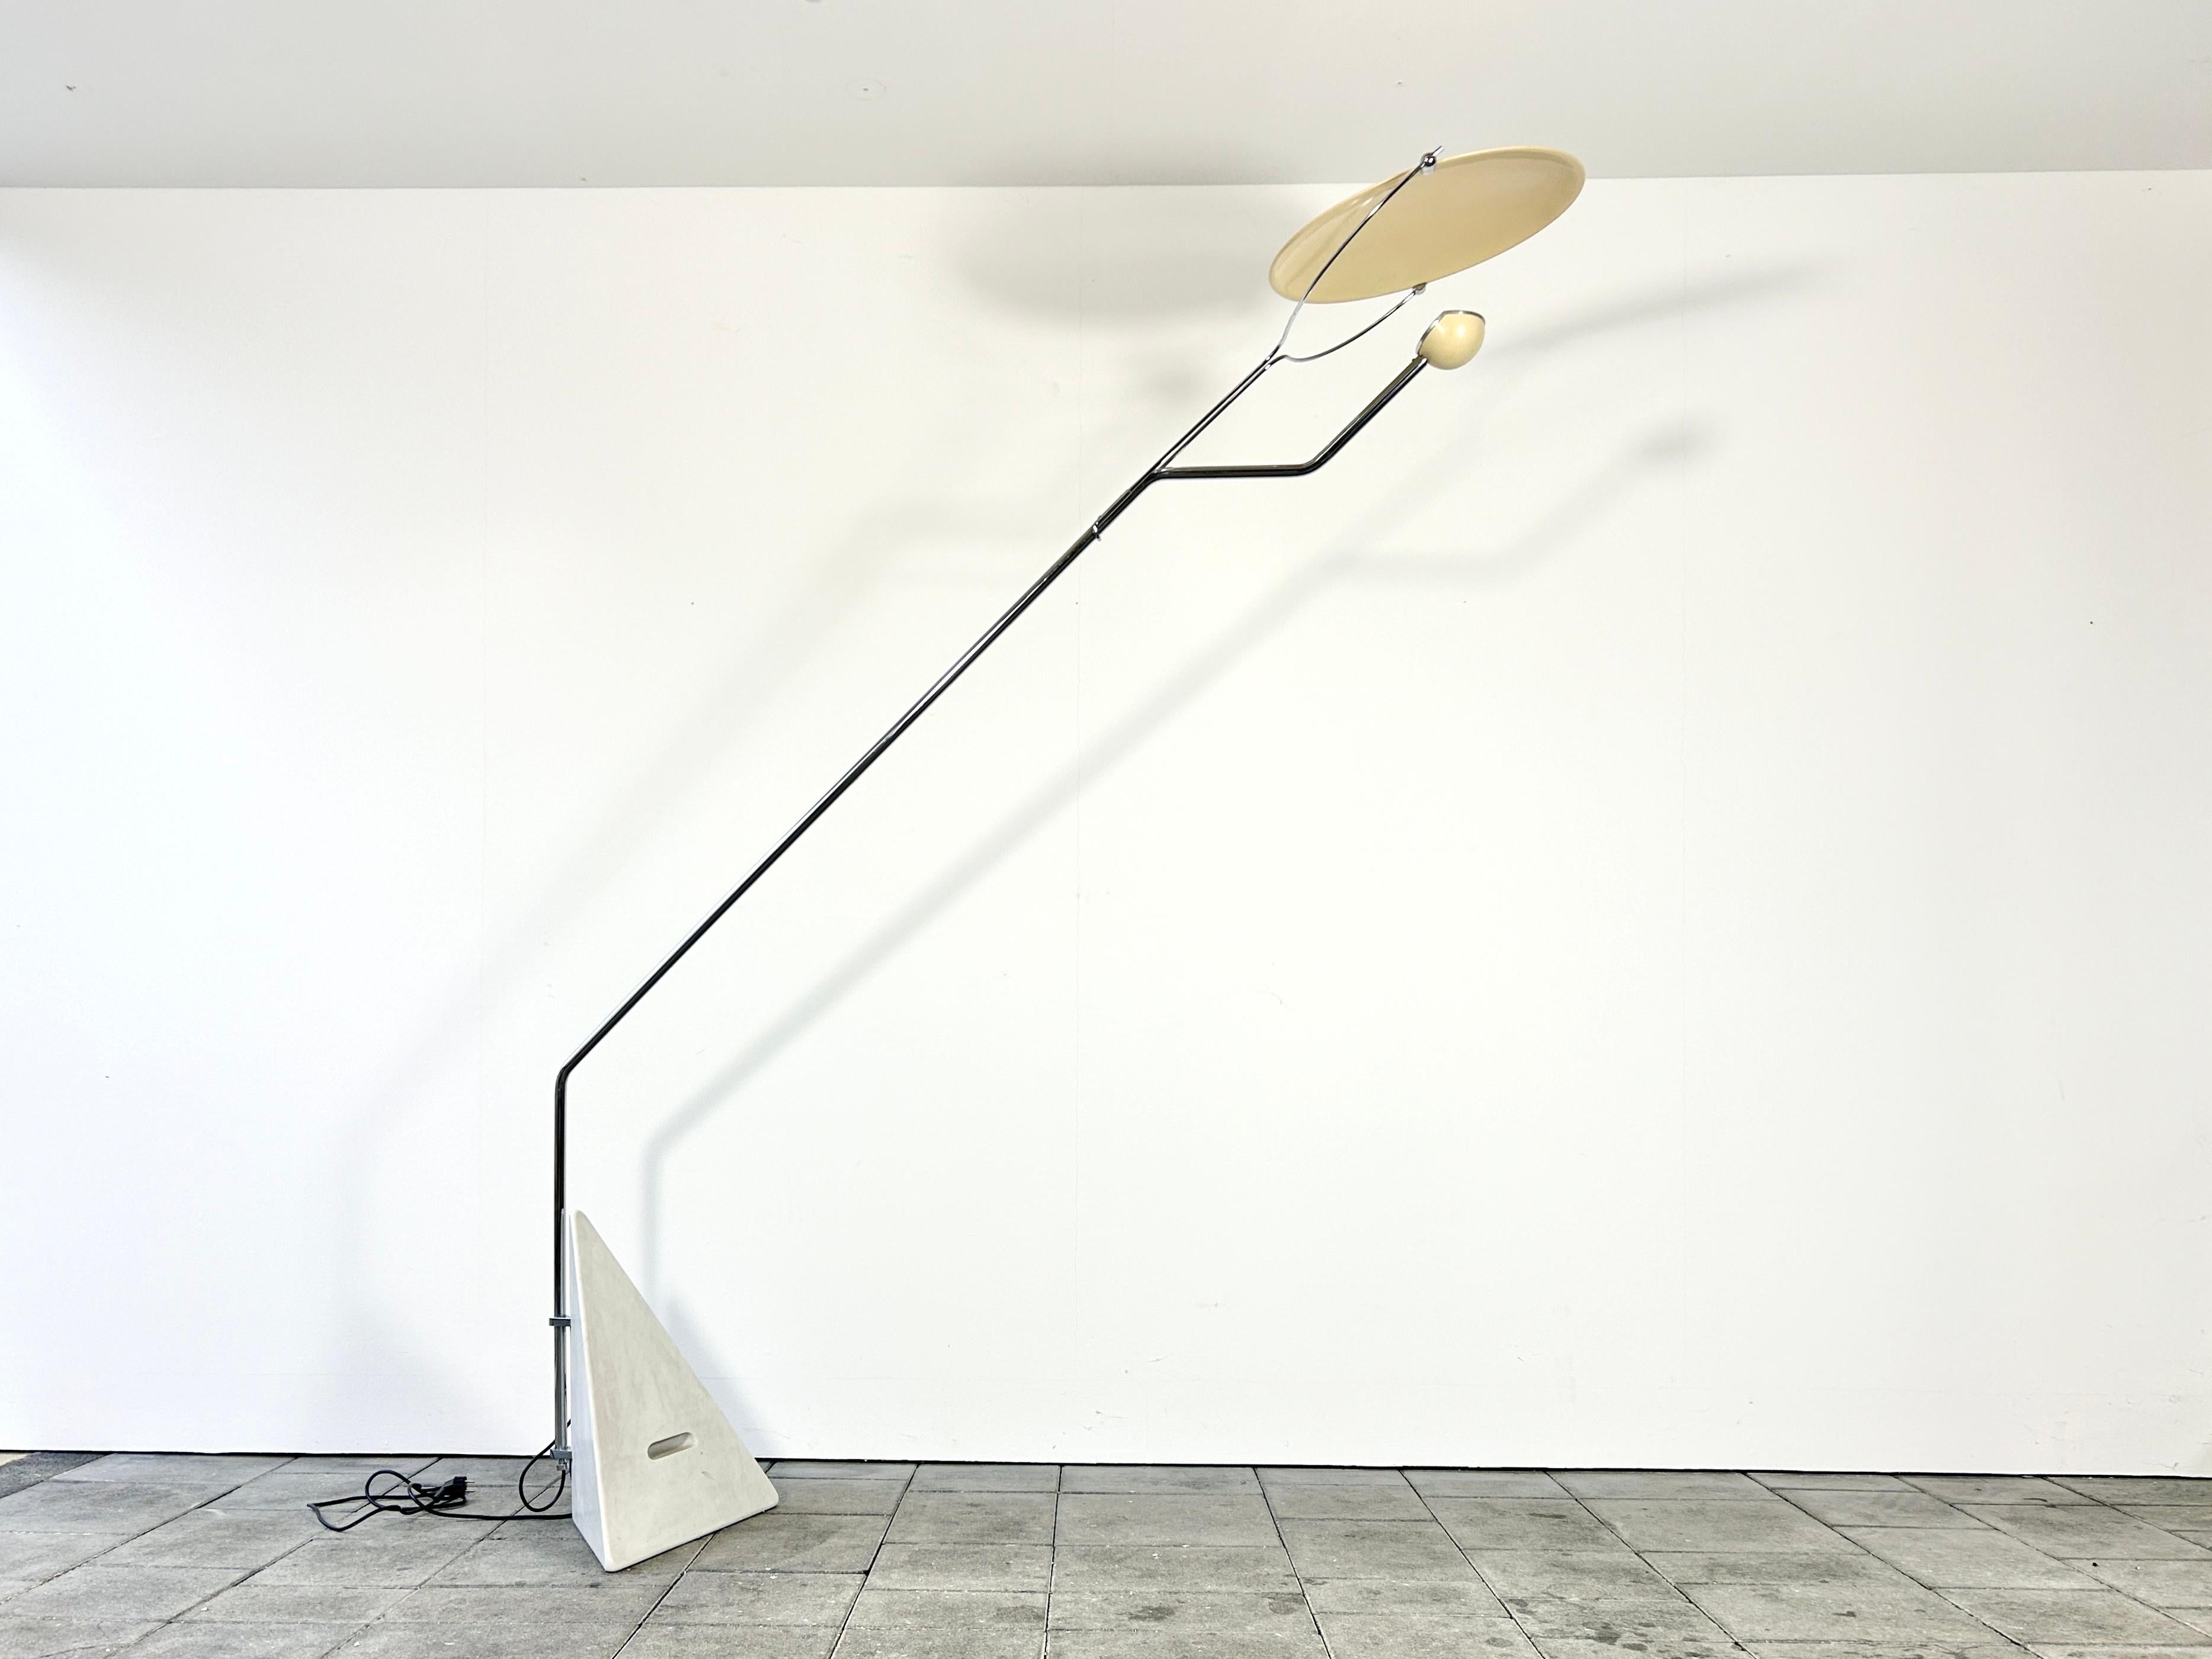 Reflessione floor lamp designed by Claudio  in 1973.

manufactured by Skipper, Italy in the 1970ies. 

This collectible lamp is no longer in production. 

The Riflessione floor lamp by Claudio Salocchi has a triangular marble base, a chromed tubular